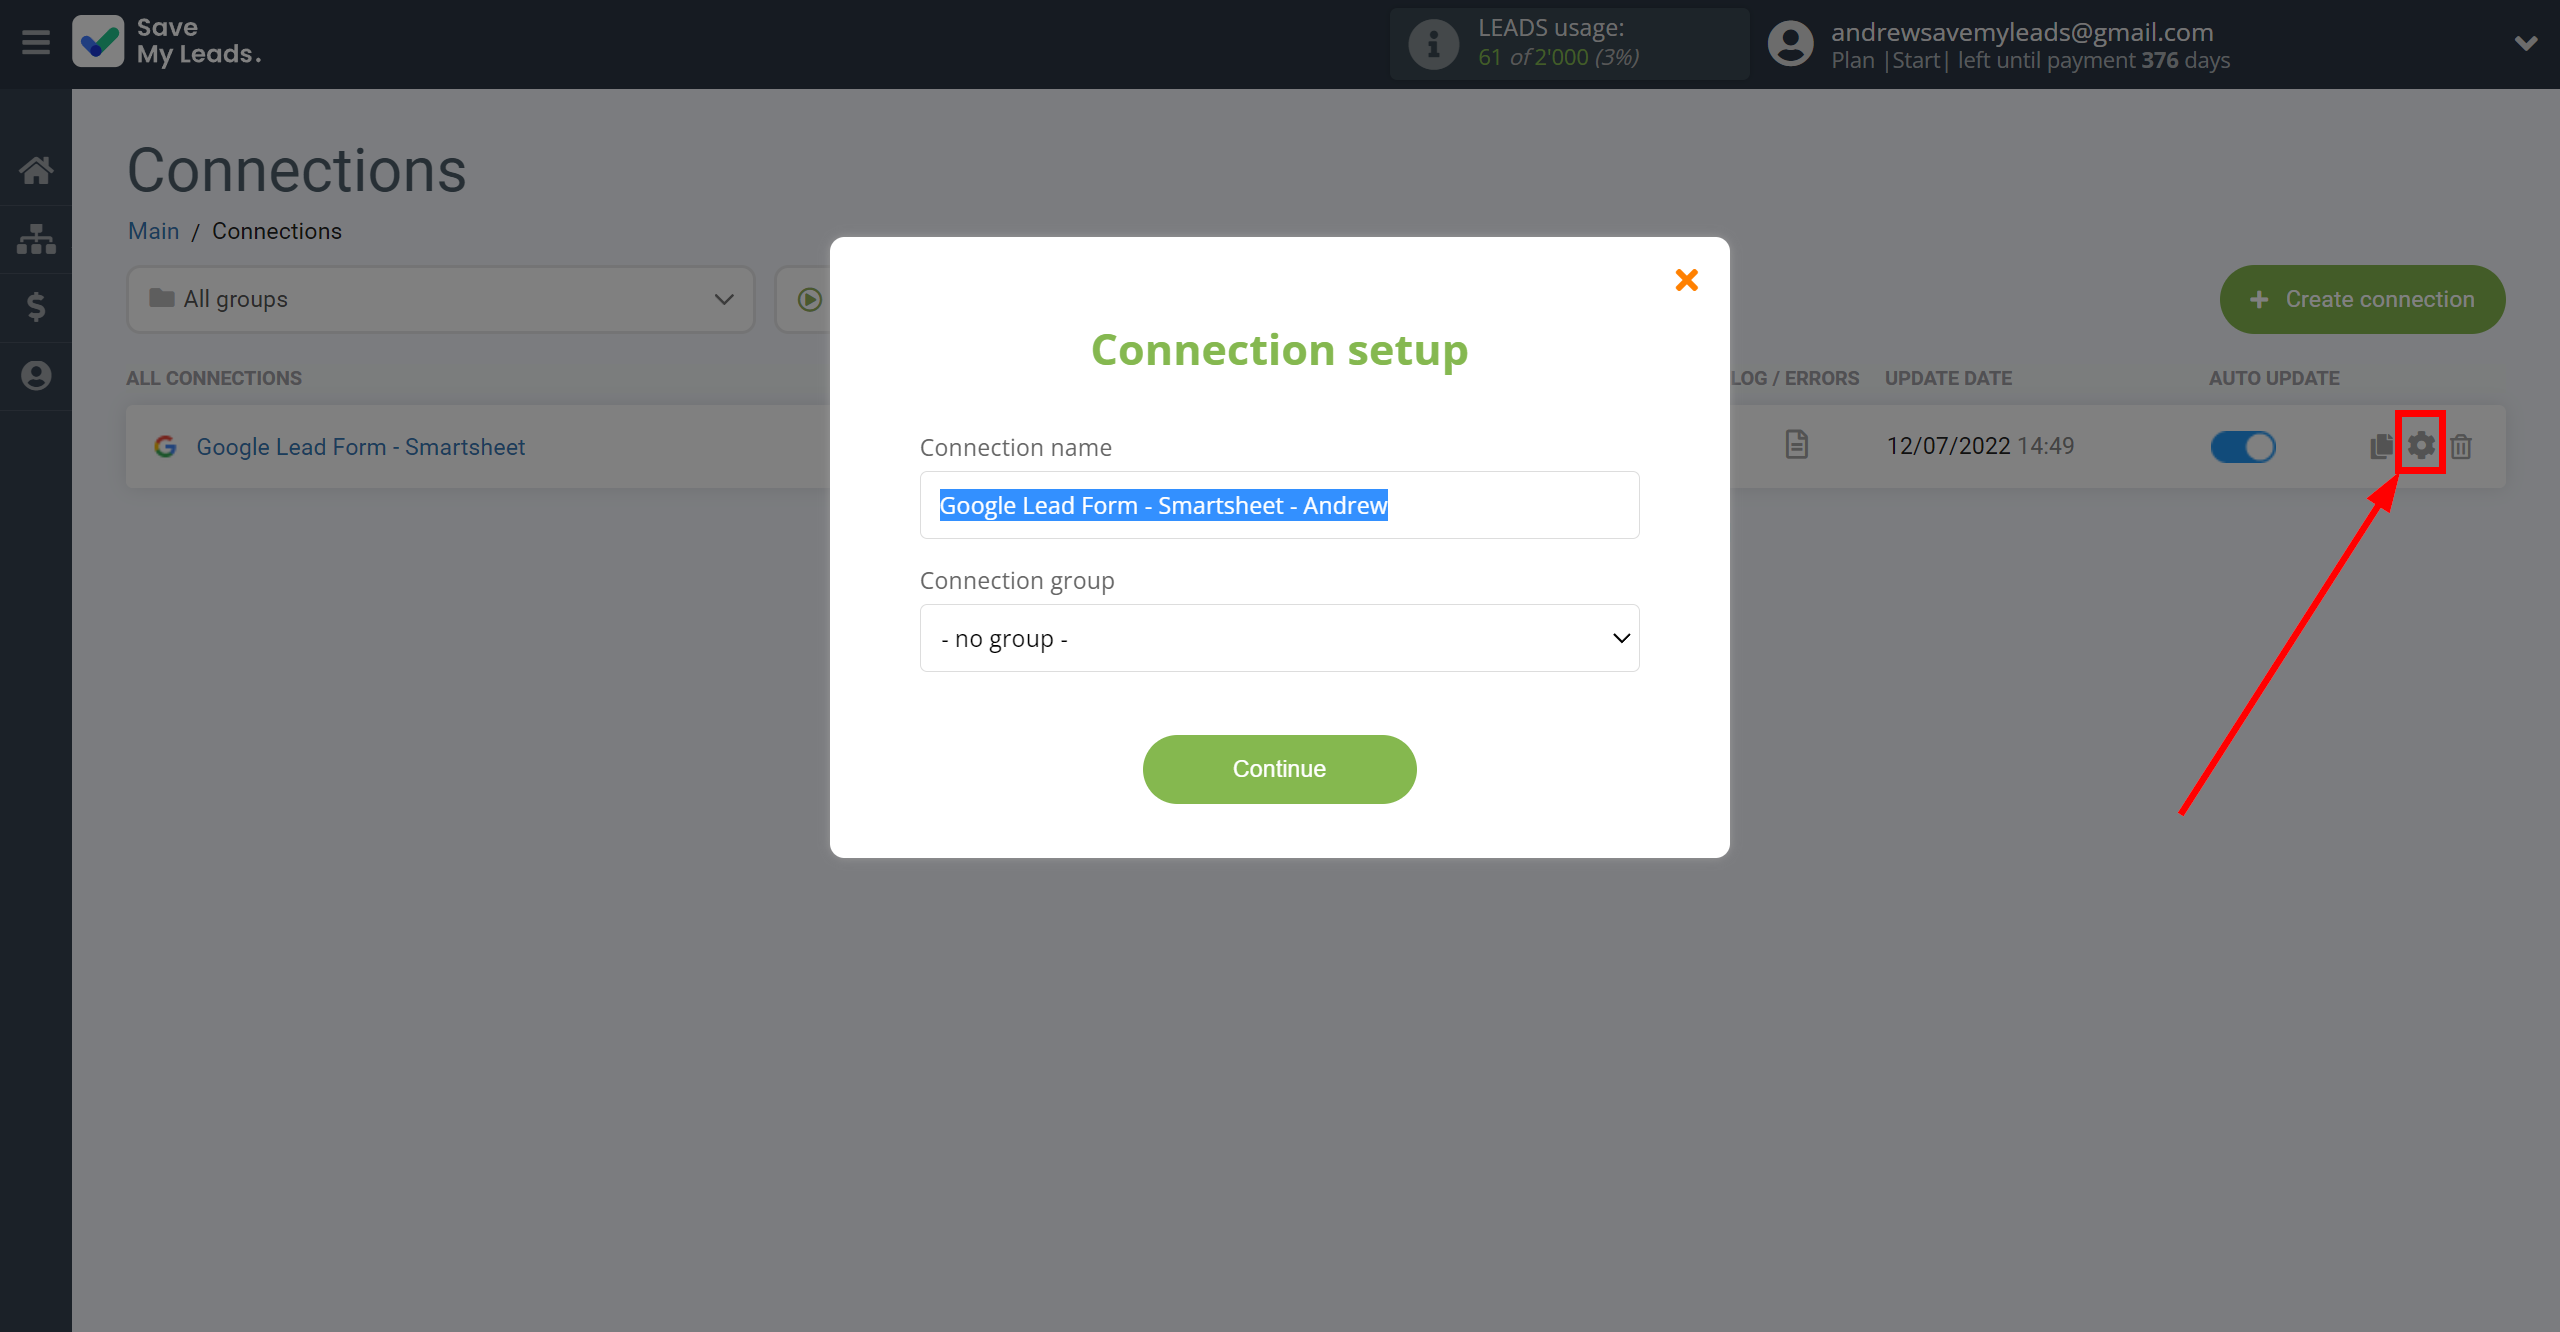 How to Connect Google Lead Form with Smartsheet | Name and group connection